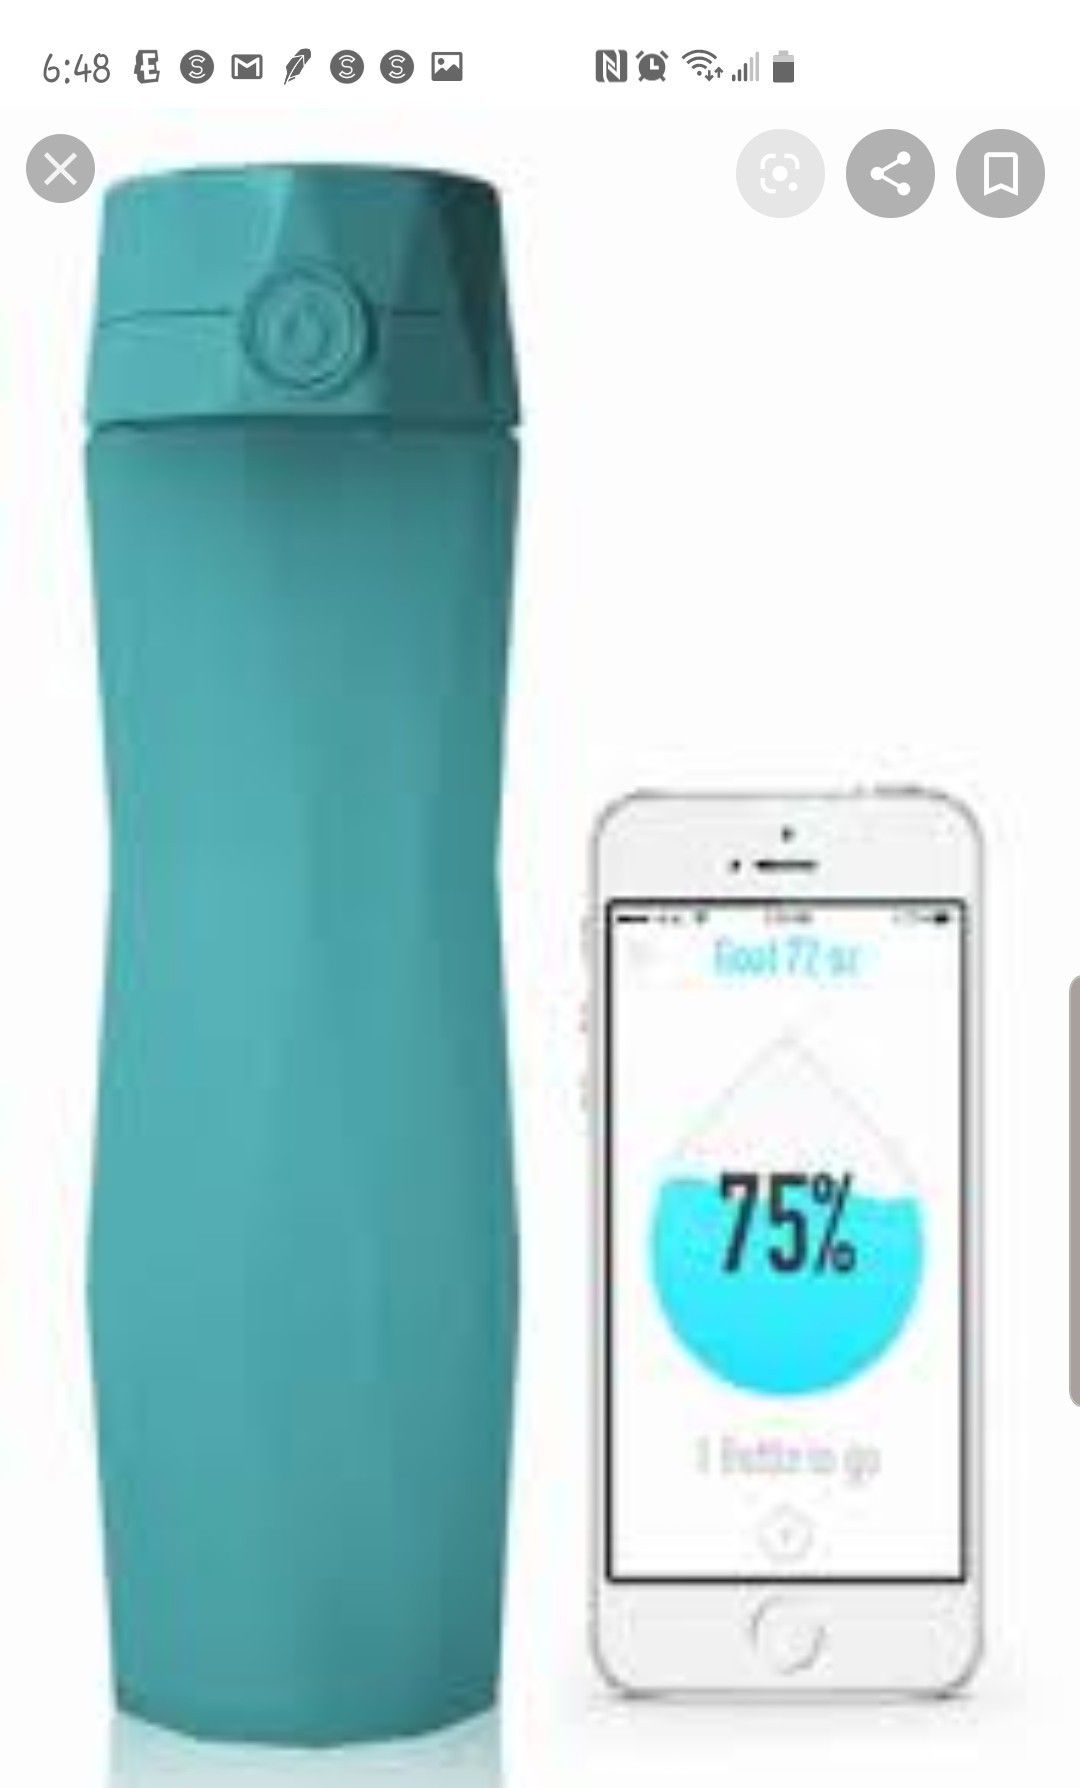 Hydrate spark 2.0 Bluetooth water bottle